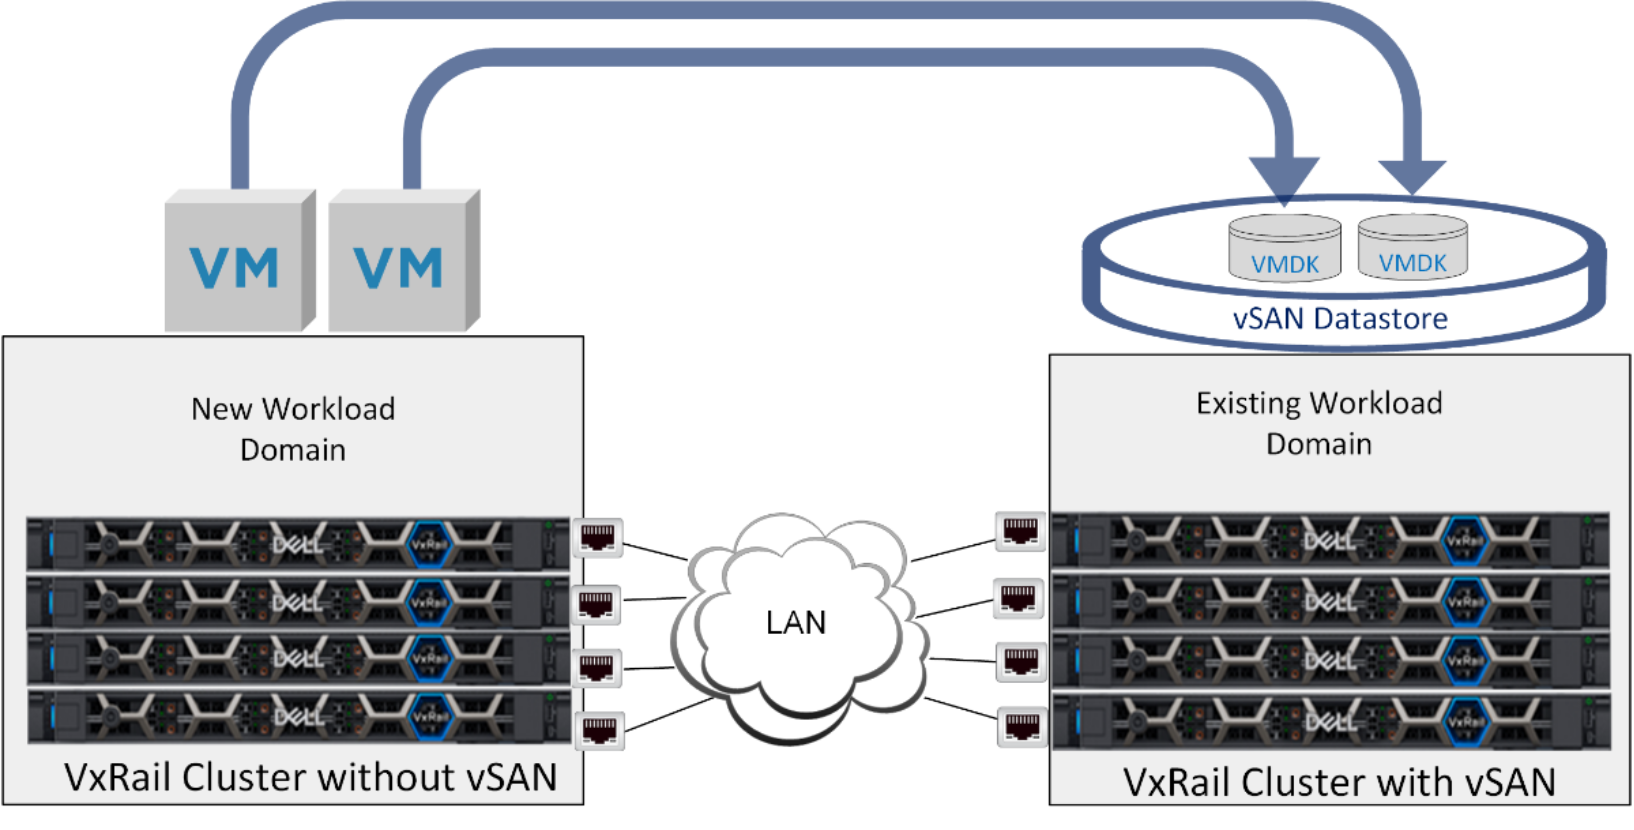 This figure shows a remote vSAN datastore to support VI workload domains.